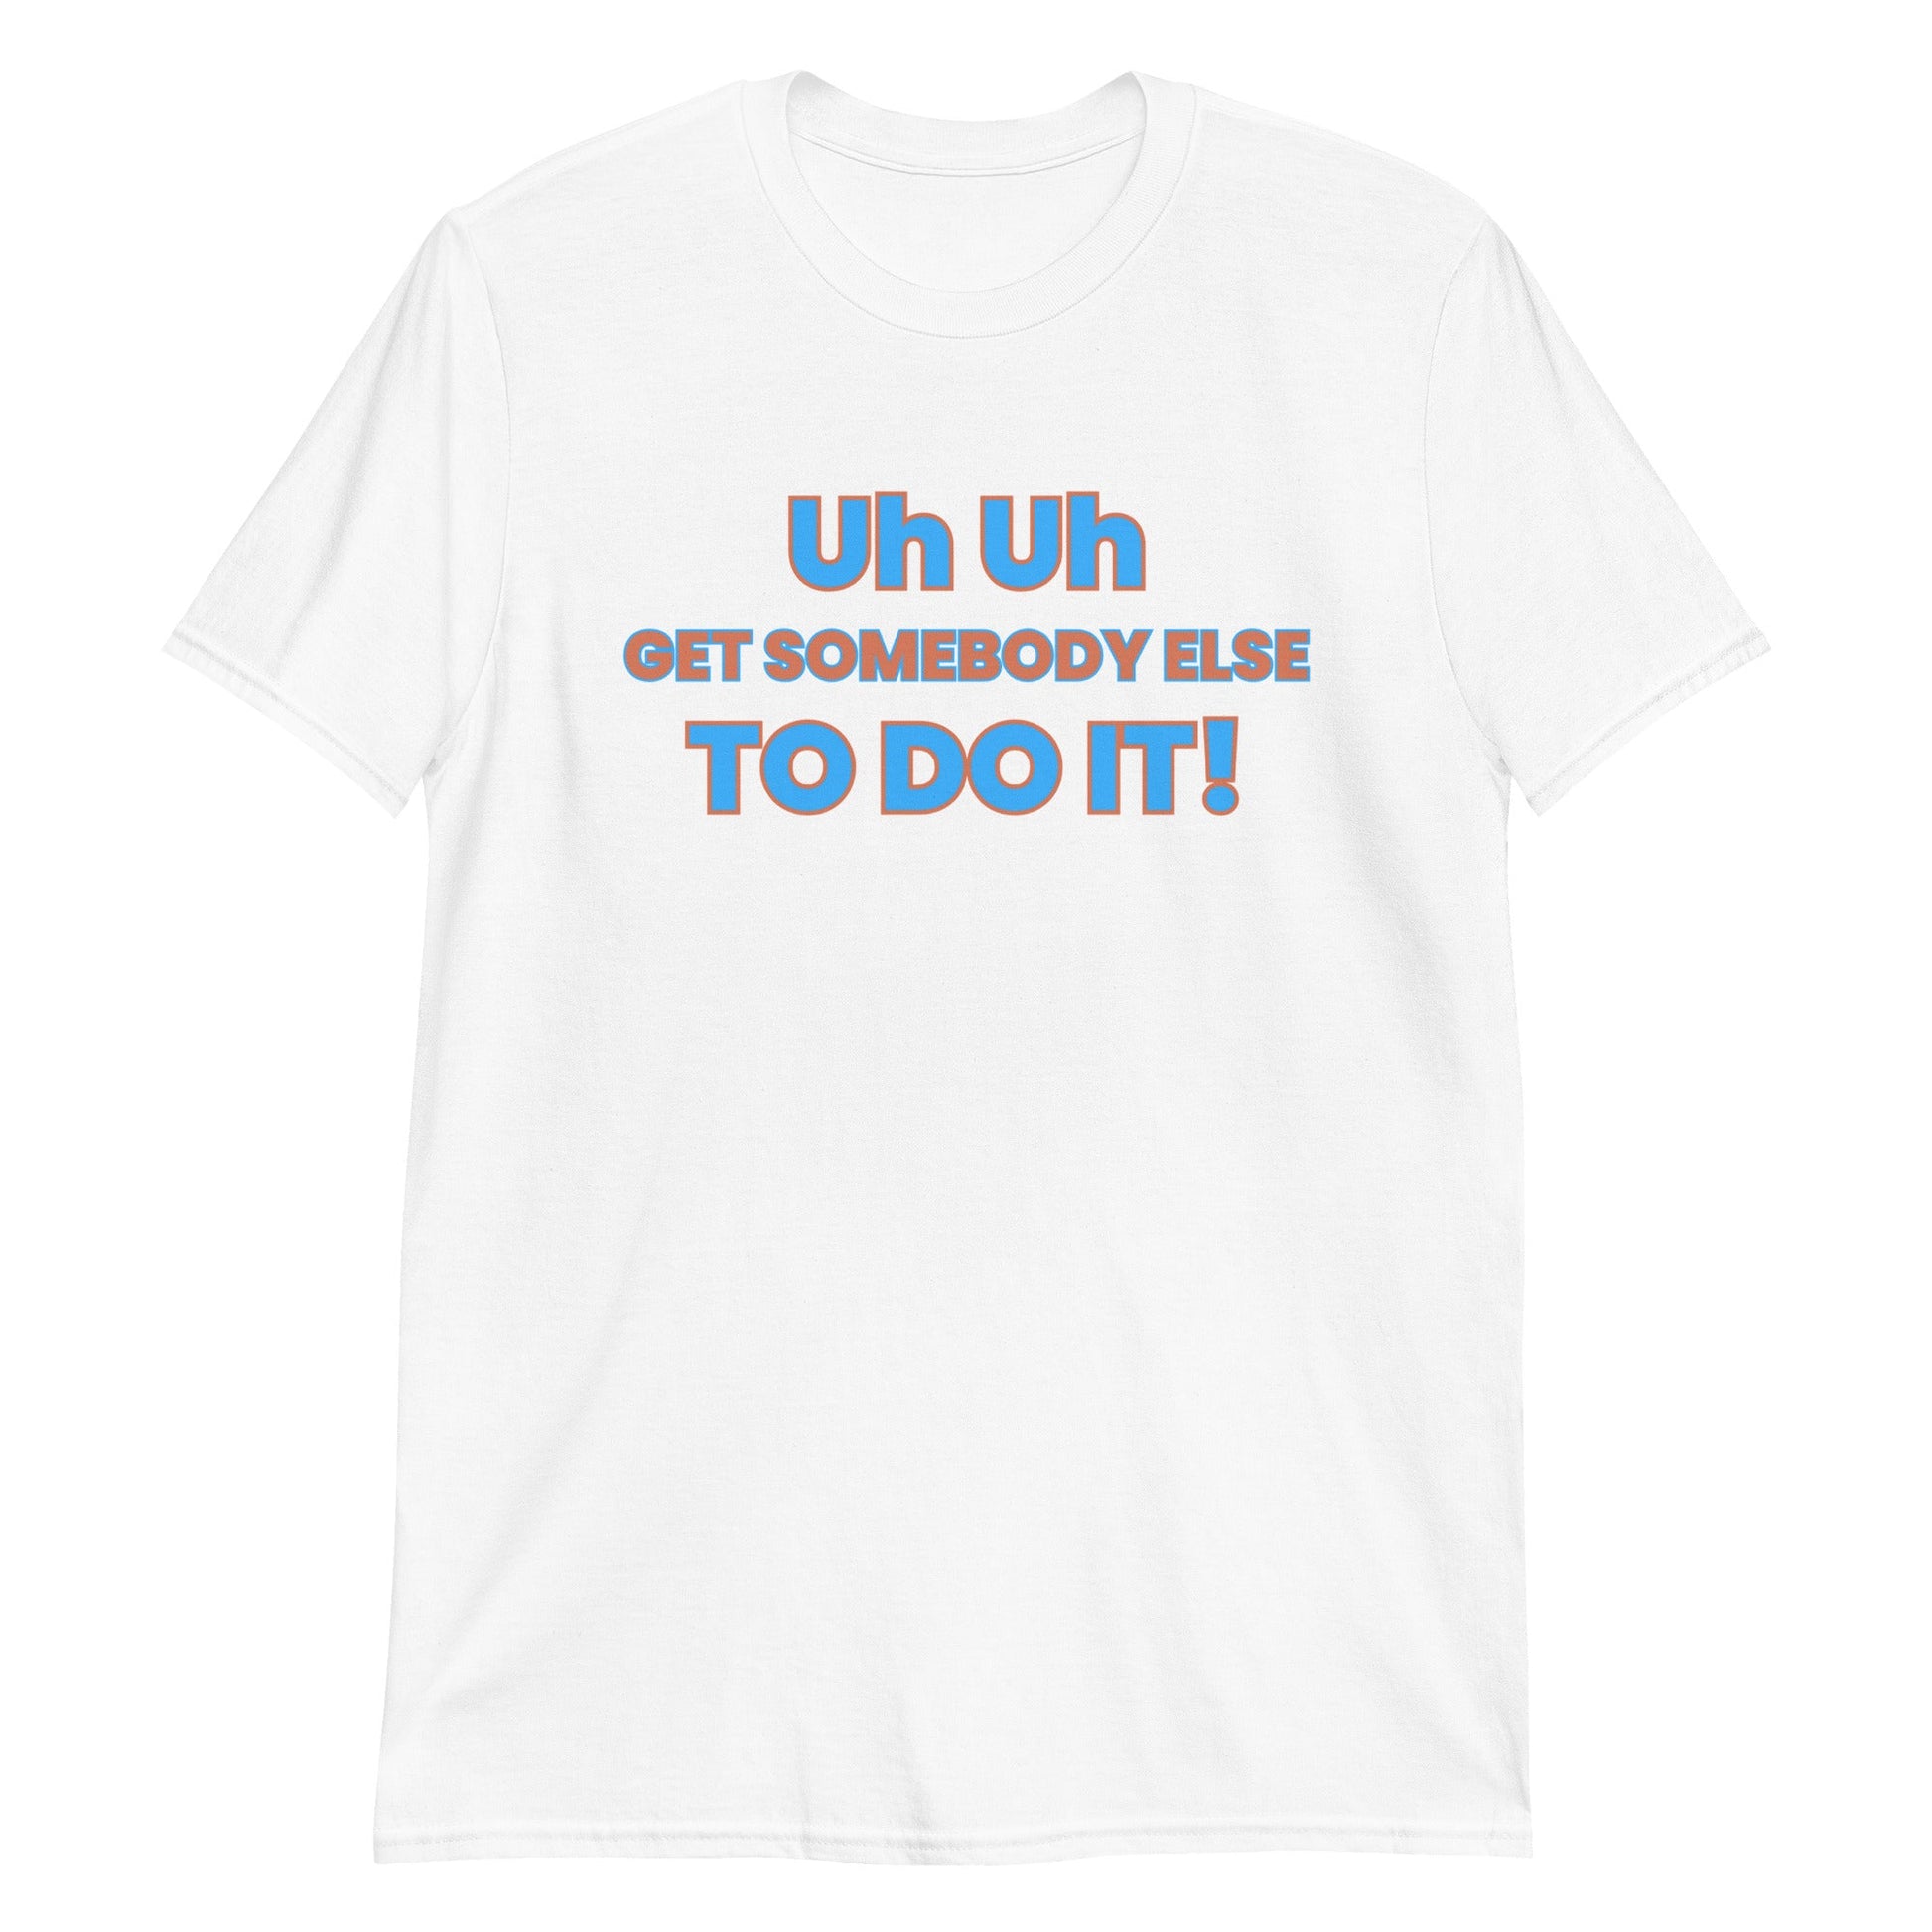 Uh Uh Get Somebody Else To Do It! Short-Sleeve Unisex T-Shirt (For a Slim Fit Order A Size Down) - Catch This Tea Shirts